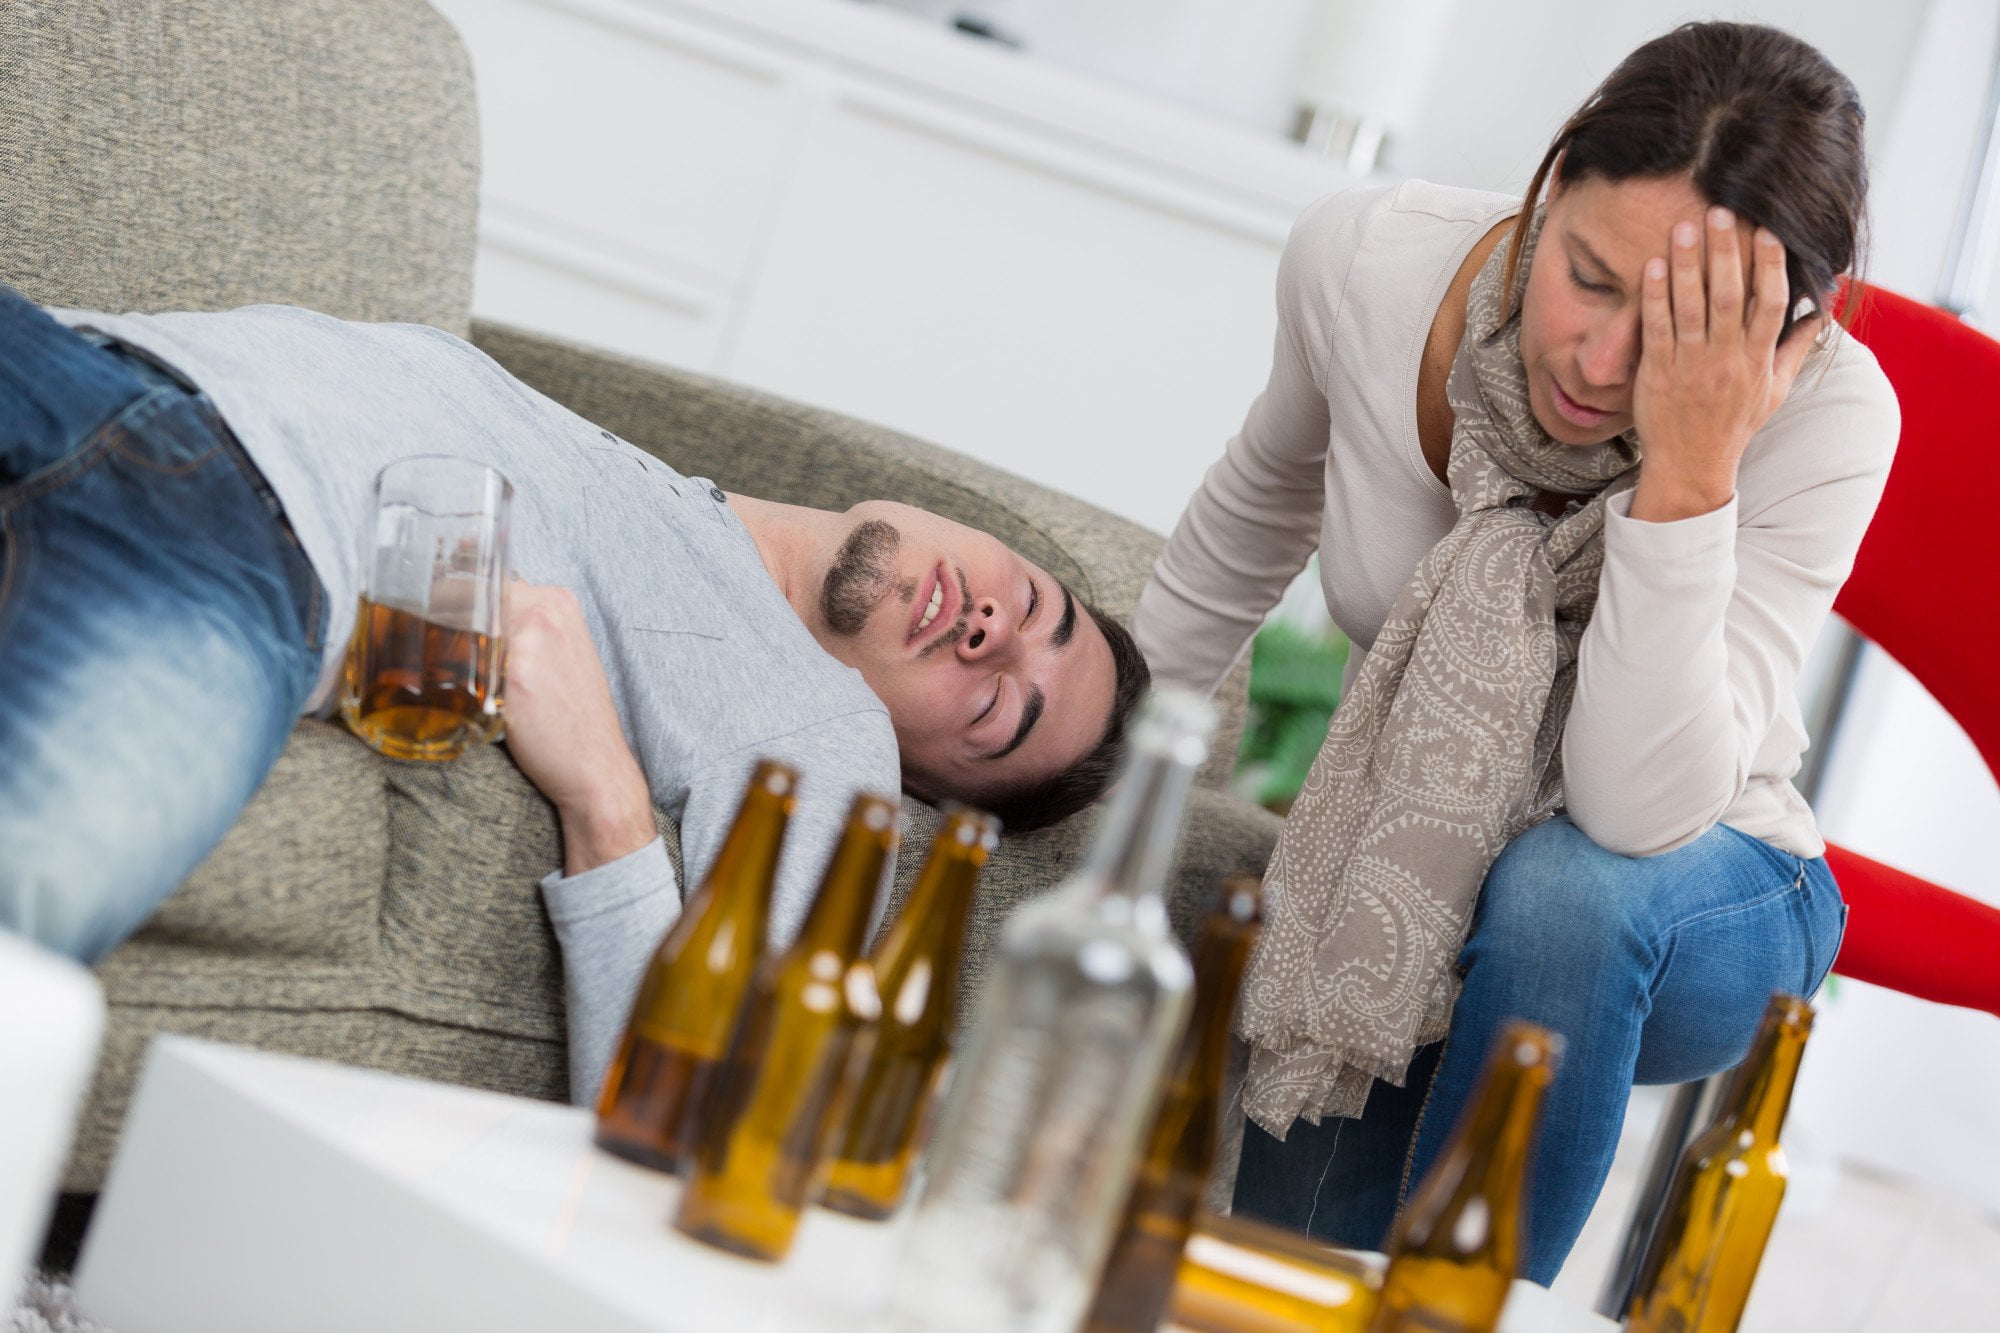 How long is rehab for alcohol? Get the facts on alcohol rehab, including how long the process takes and what you can expect during treatment.